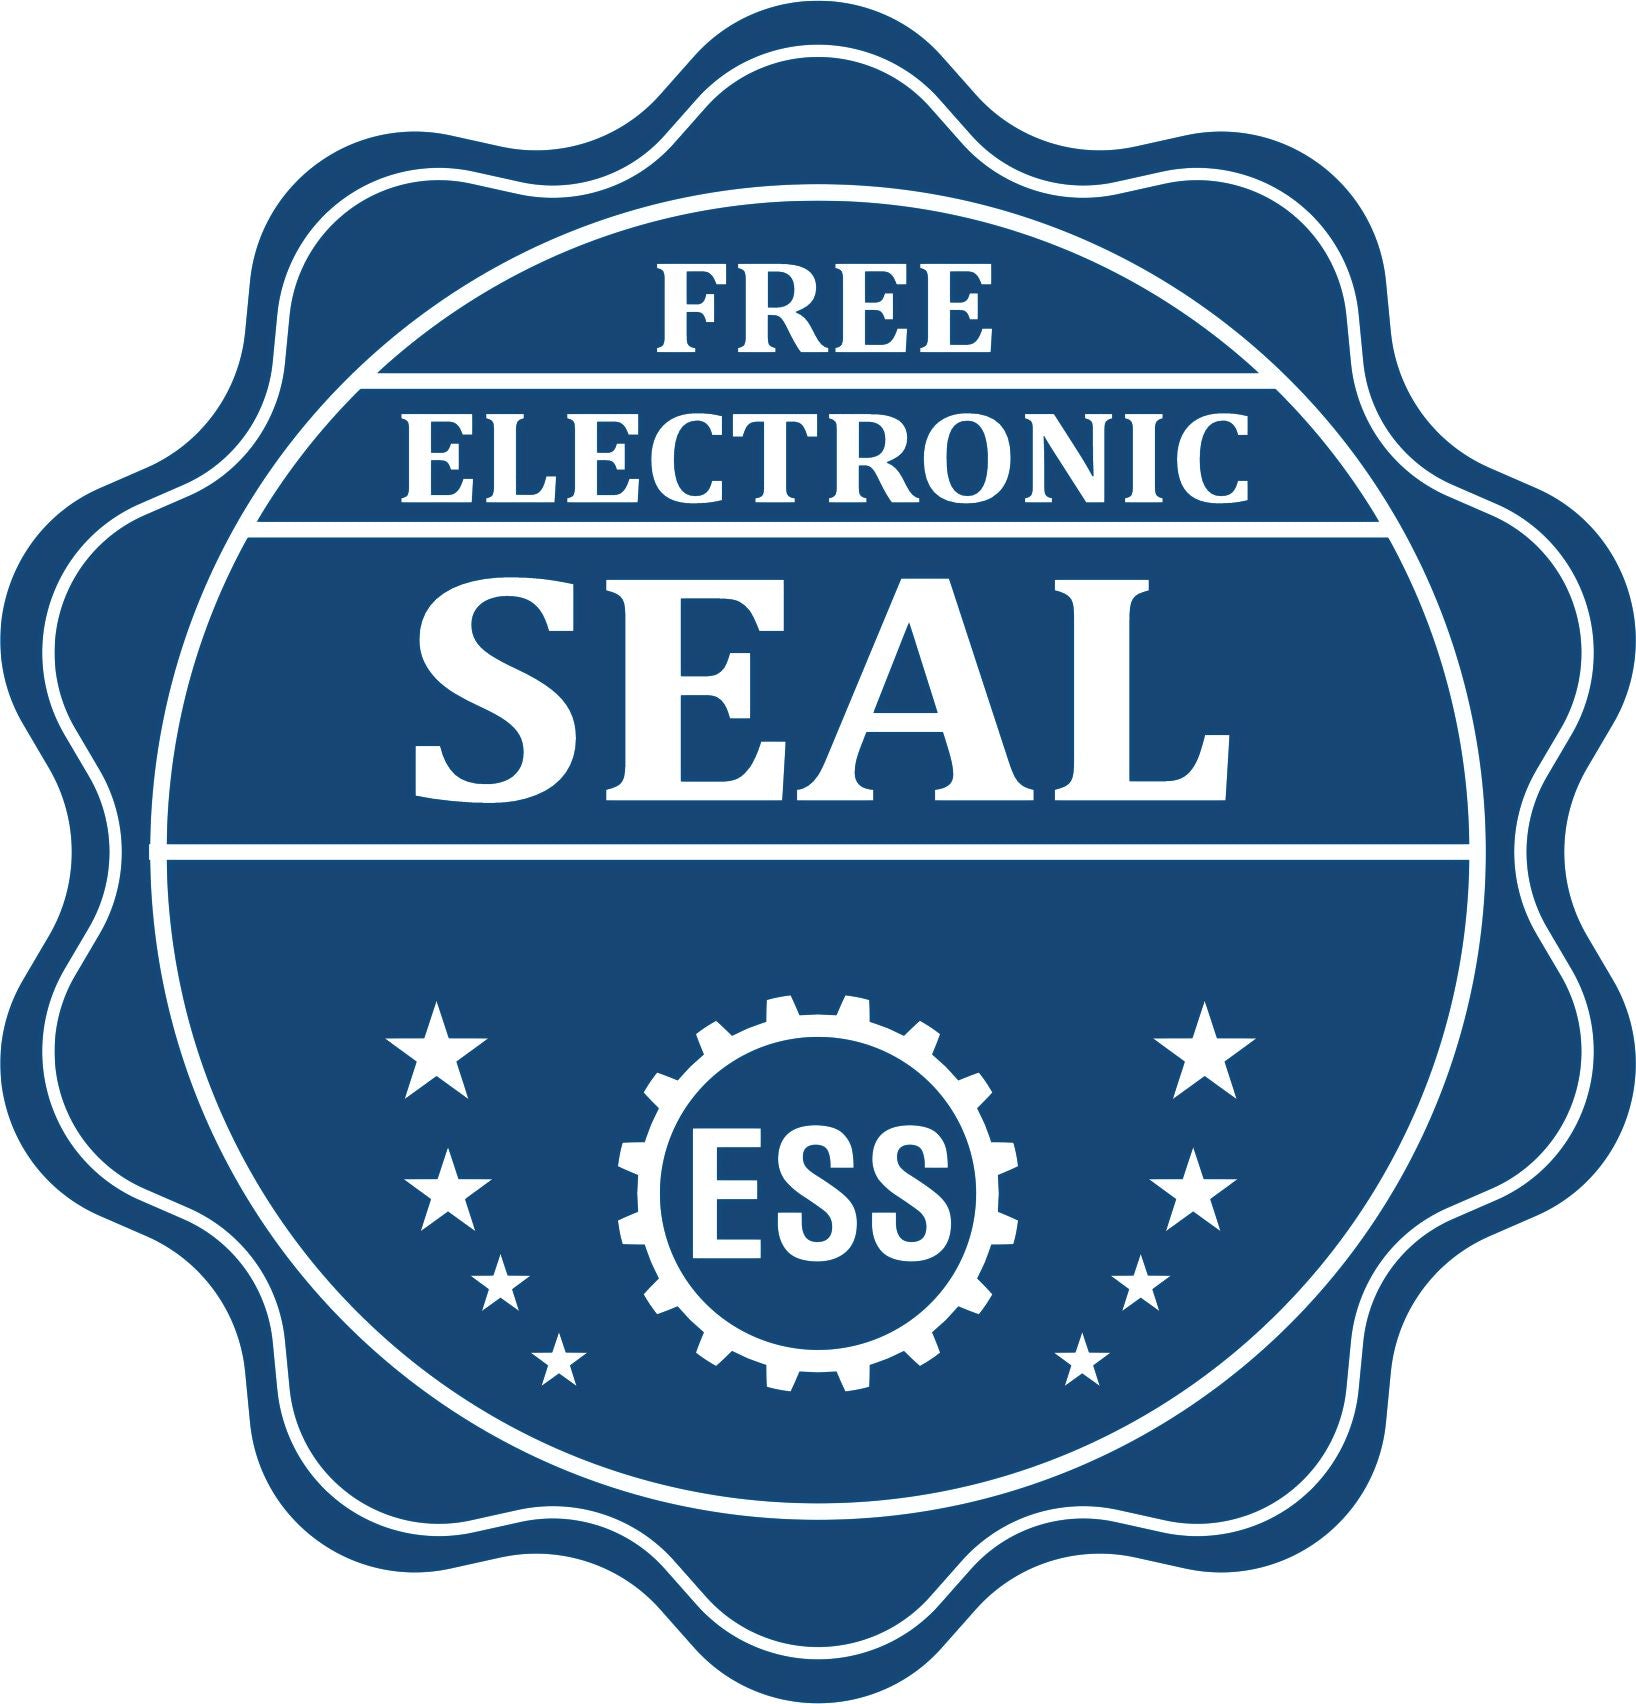 A badge showing a free electronic seal for the PSI Louisiana Notary Stamp with stars and the ESS gear on the emblem.